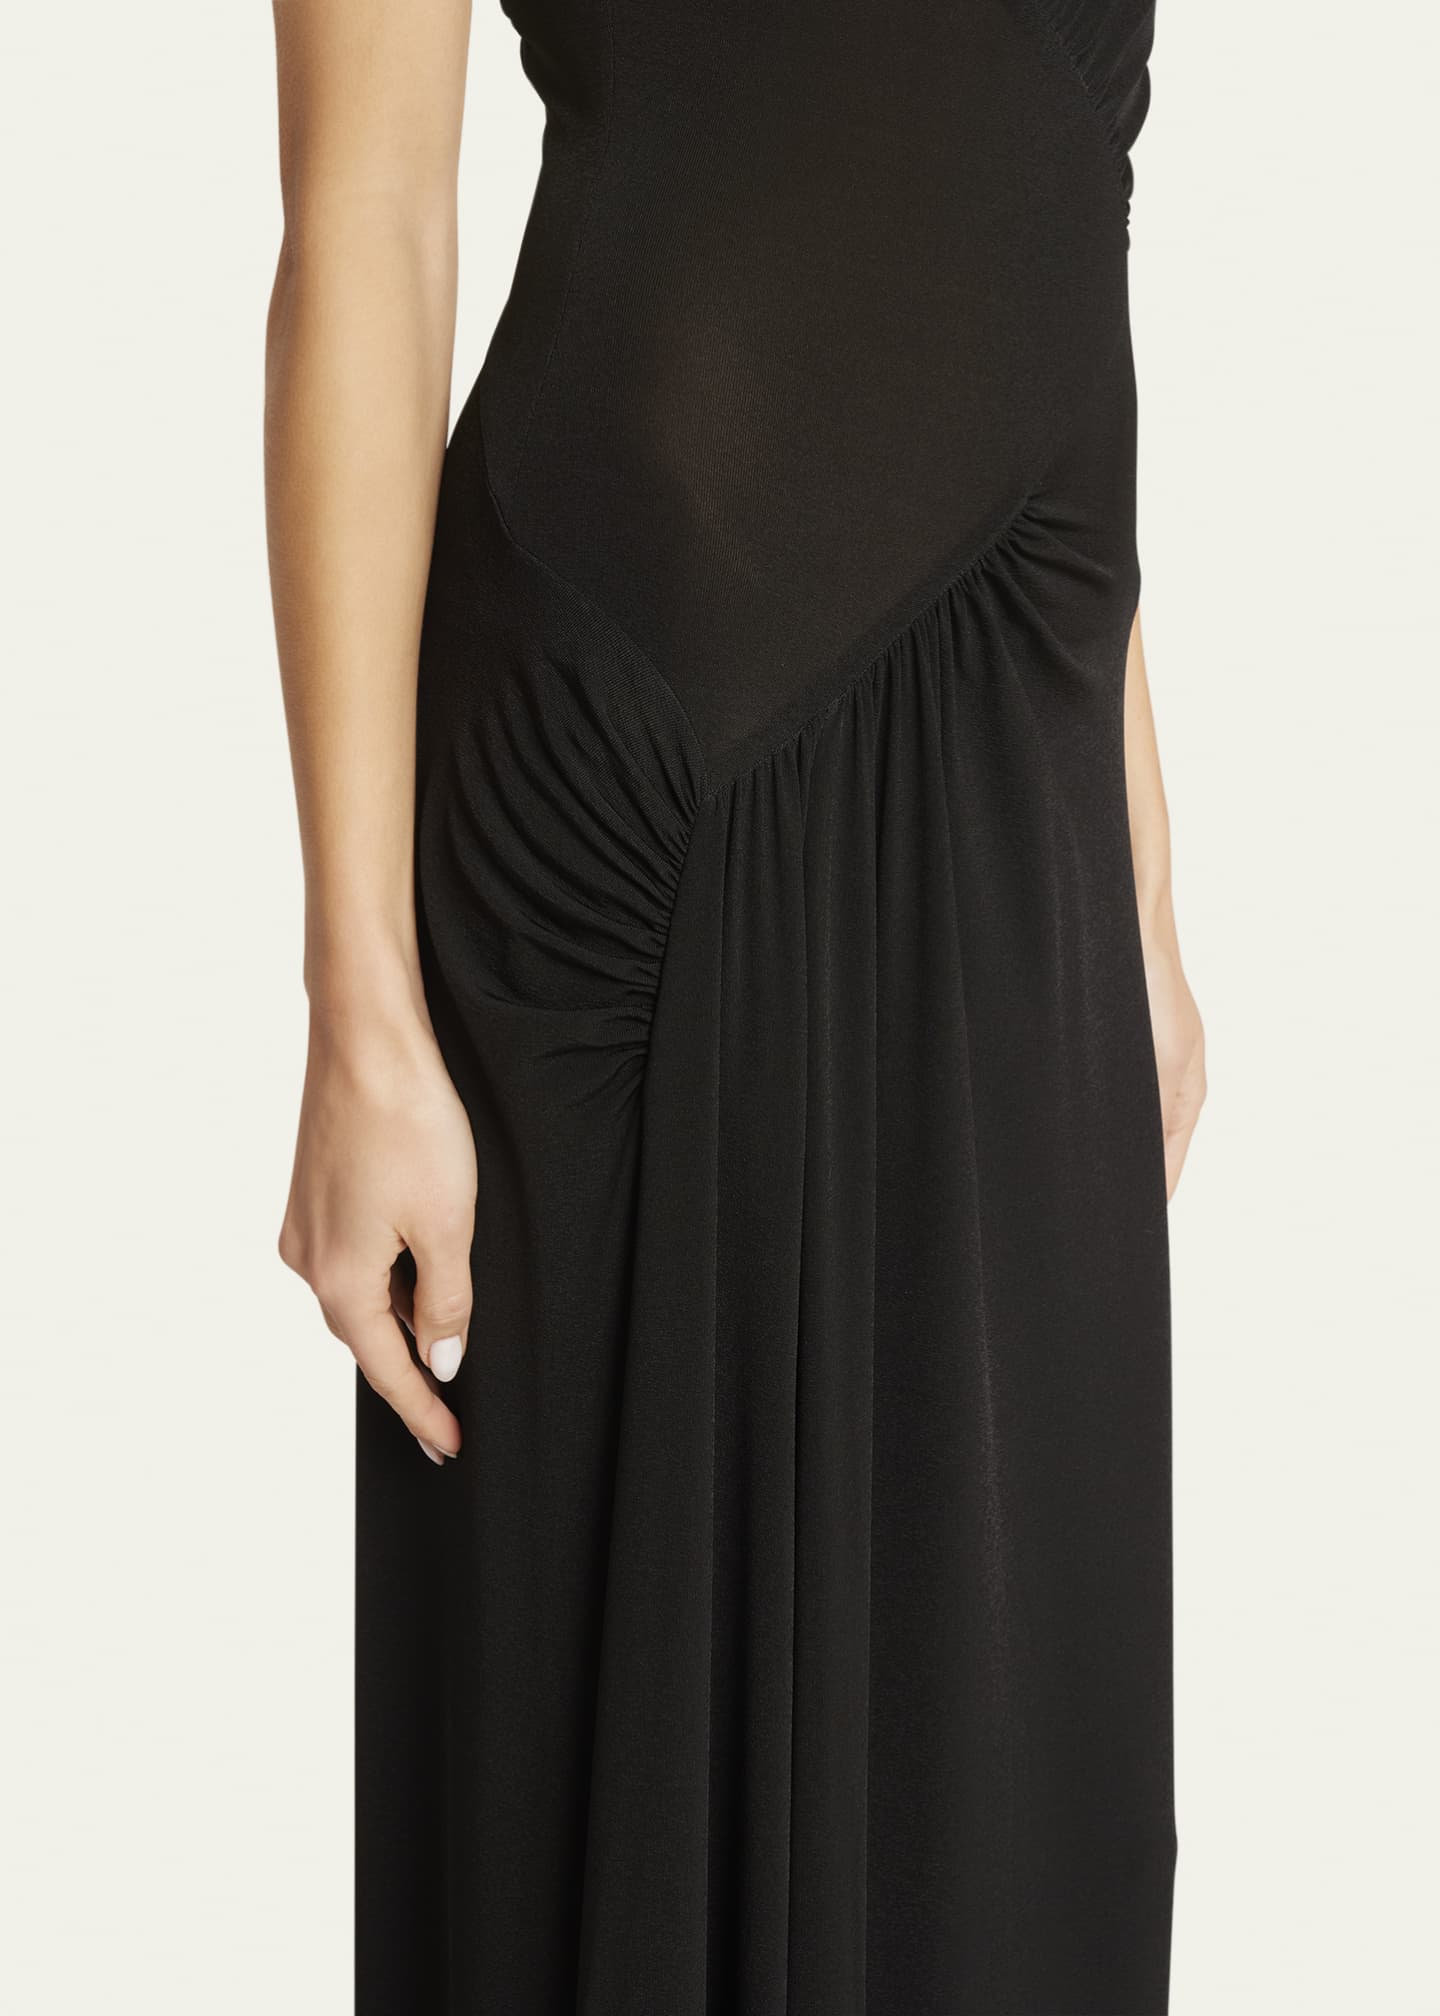 Givenchy Draped Jersey Gown with Sheer Inset Detail - Bergdorf Goodman